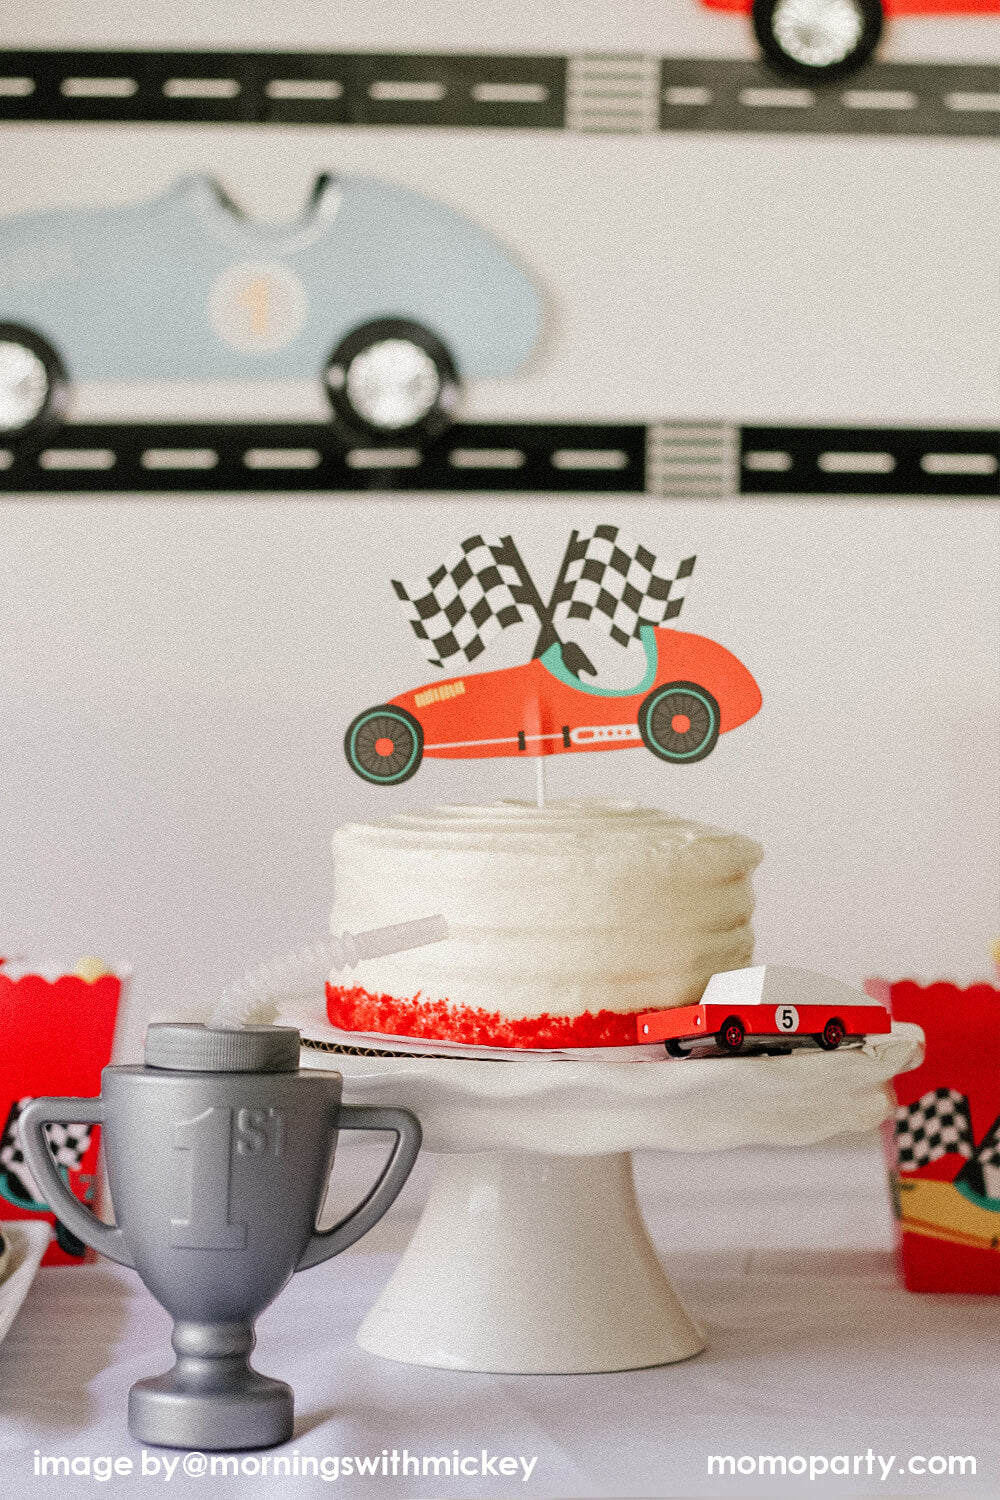 Race Car-themed Birthday party table close-up of, a Buttercream cake on a white cake stand decorated with Merrilulu Custom Race Car Cake Topper, a CANDYCAR RED RACER toy on the side, and a RACE CAR TROPHY CUP next to it. This modern Race Car Birthday party hosted by Momo Party with Mornings-with-Mickey is so fun for kids who love Disney Cars, Race Car and “two fast” 2nd birthday